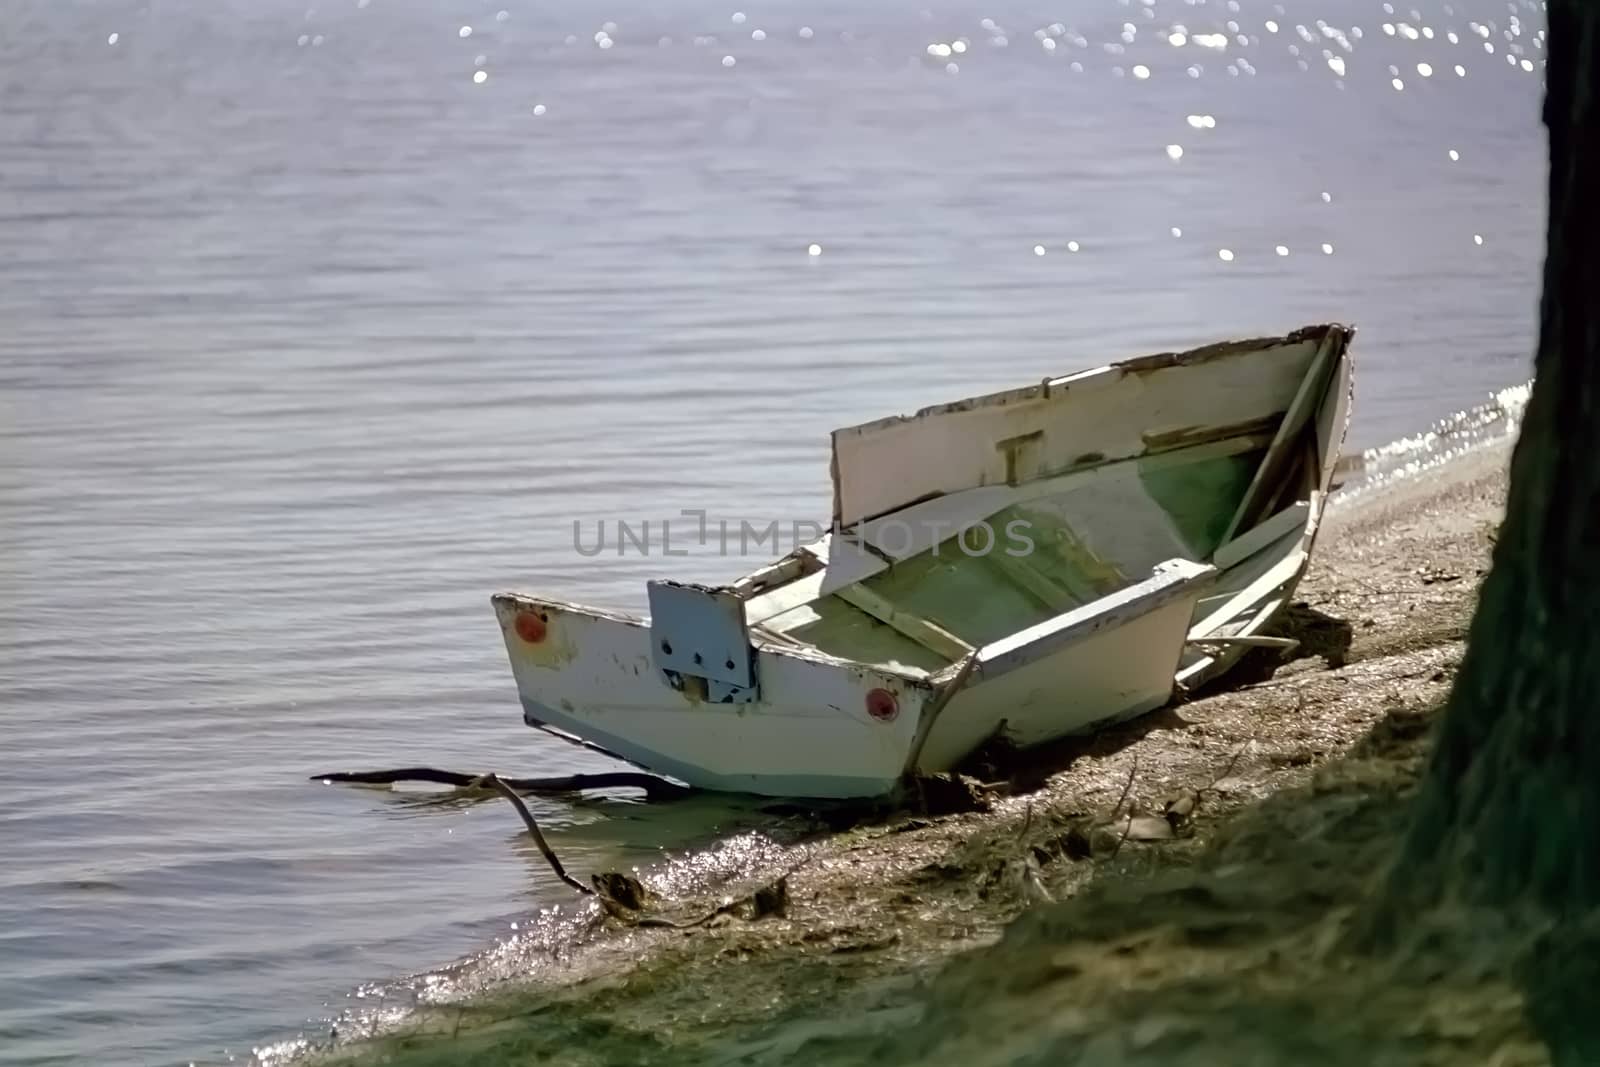 A small boat, smashed and washed up on the shore by definitearts